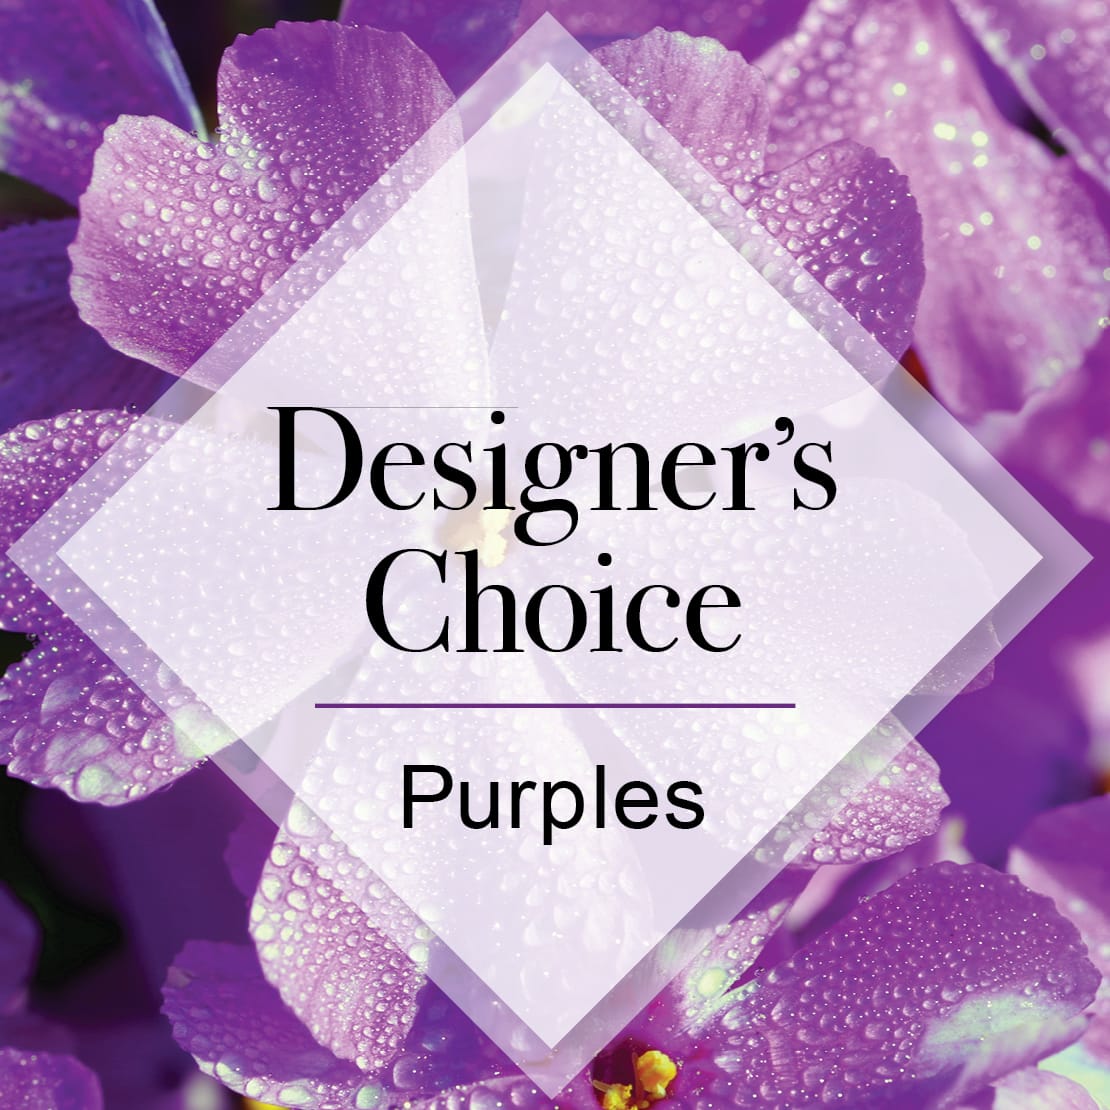 Designers Choice Purple - A selection that will be predominately the color that you have chosen with accents and greenery to compliment. The designers have the flexibility to create something unique and beautiful for you and is often the best value for you. If you have specifics you would like to request please include in the comments / special instructions area when placing your order.